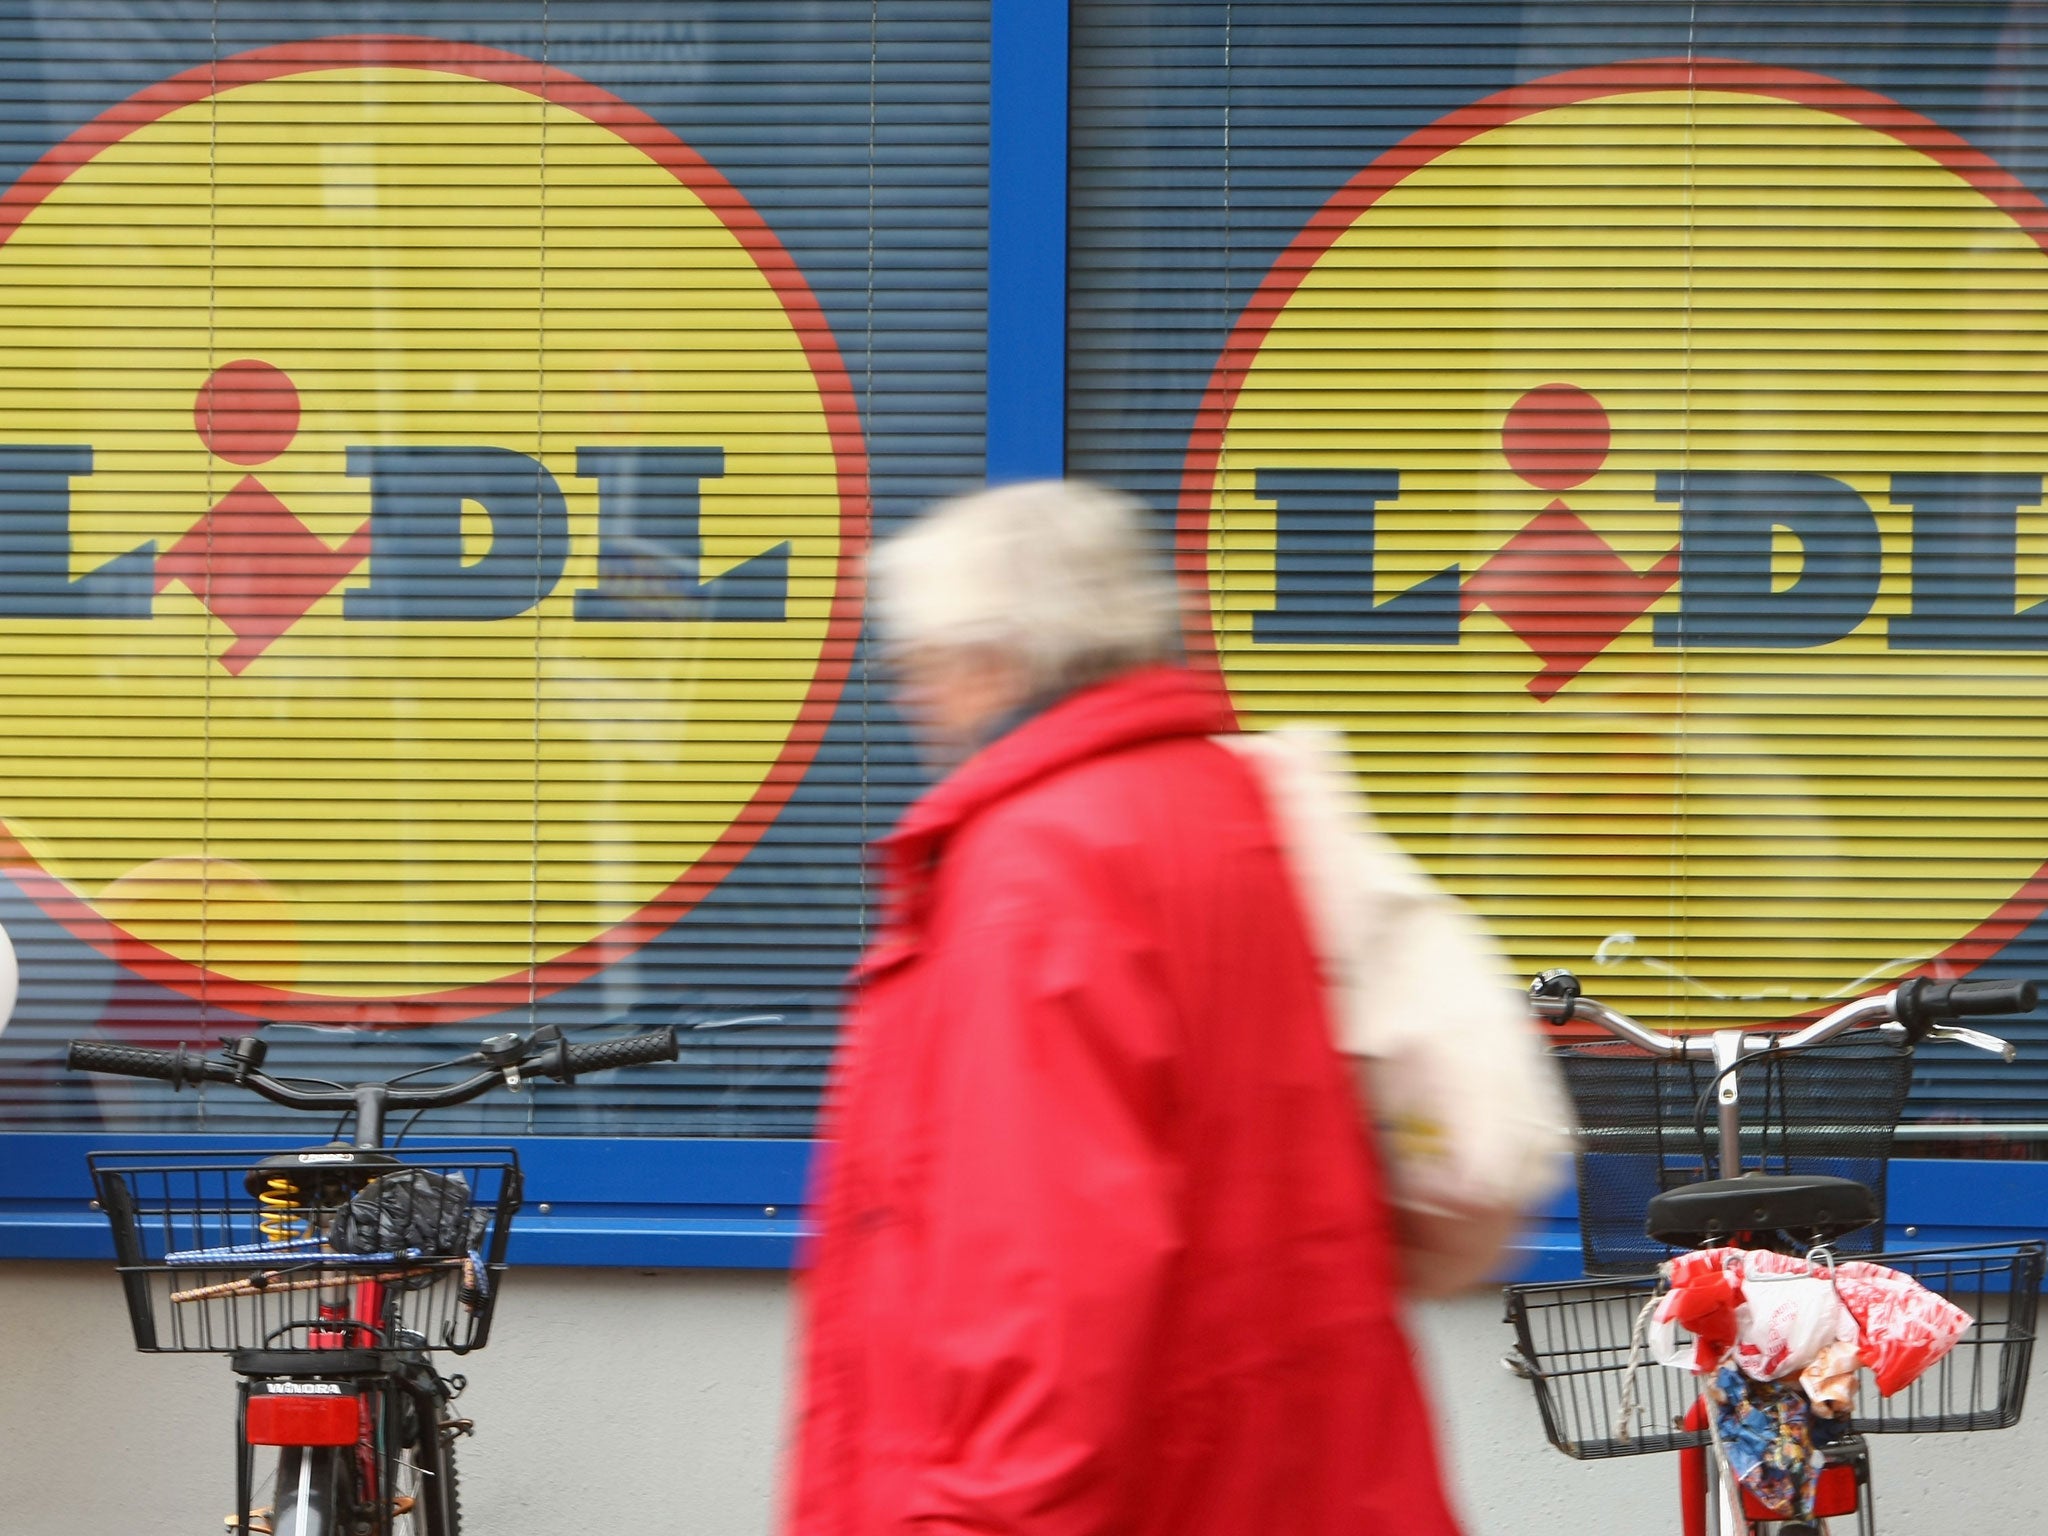 Lidl and Aldi's market share is up 5 per cent in five years